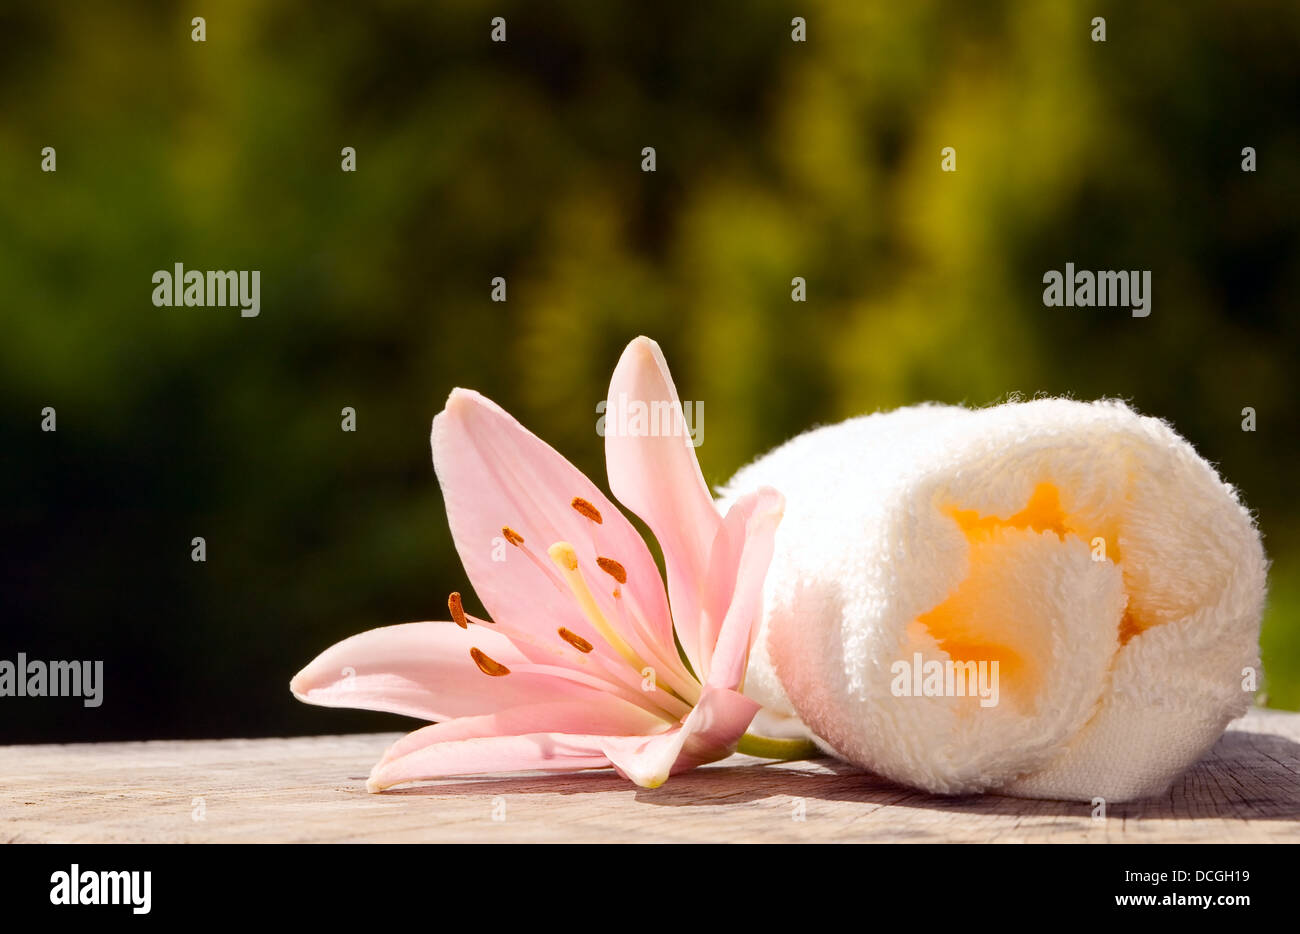 White towels with flower on green nature background Stock Photo